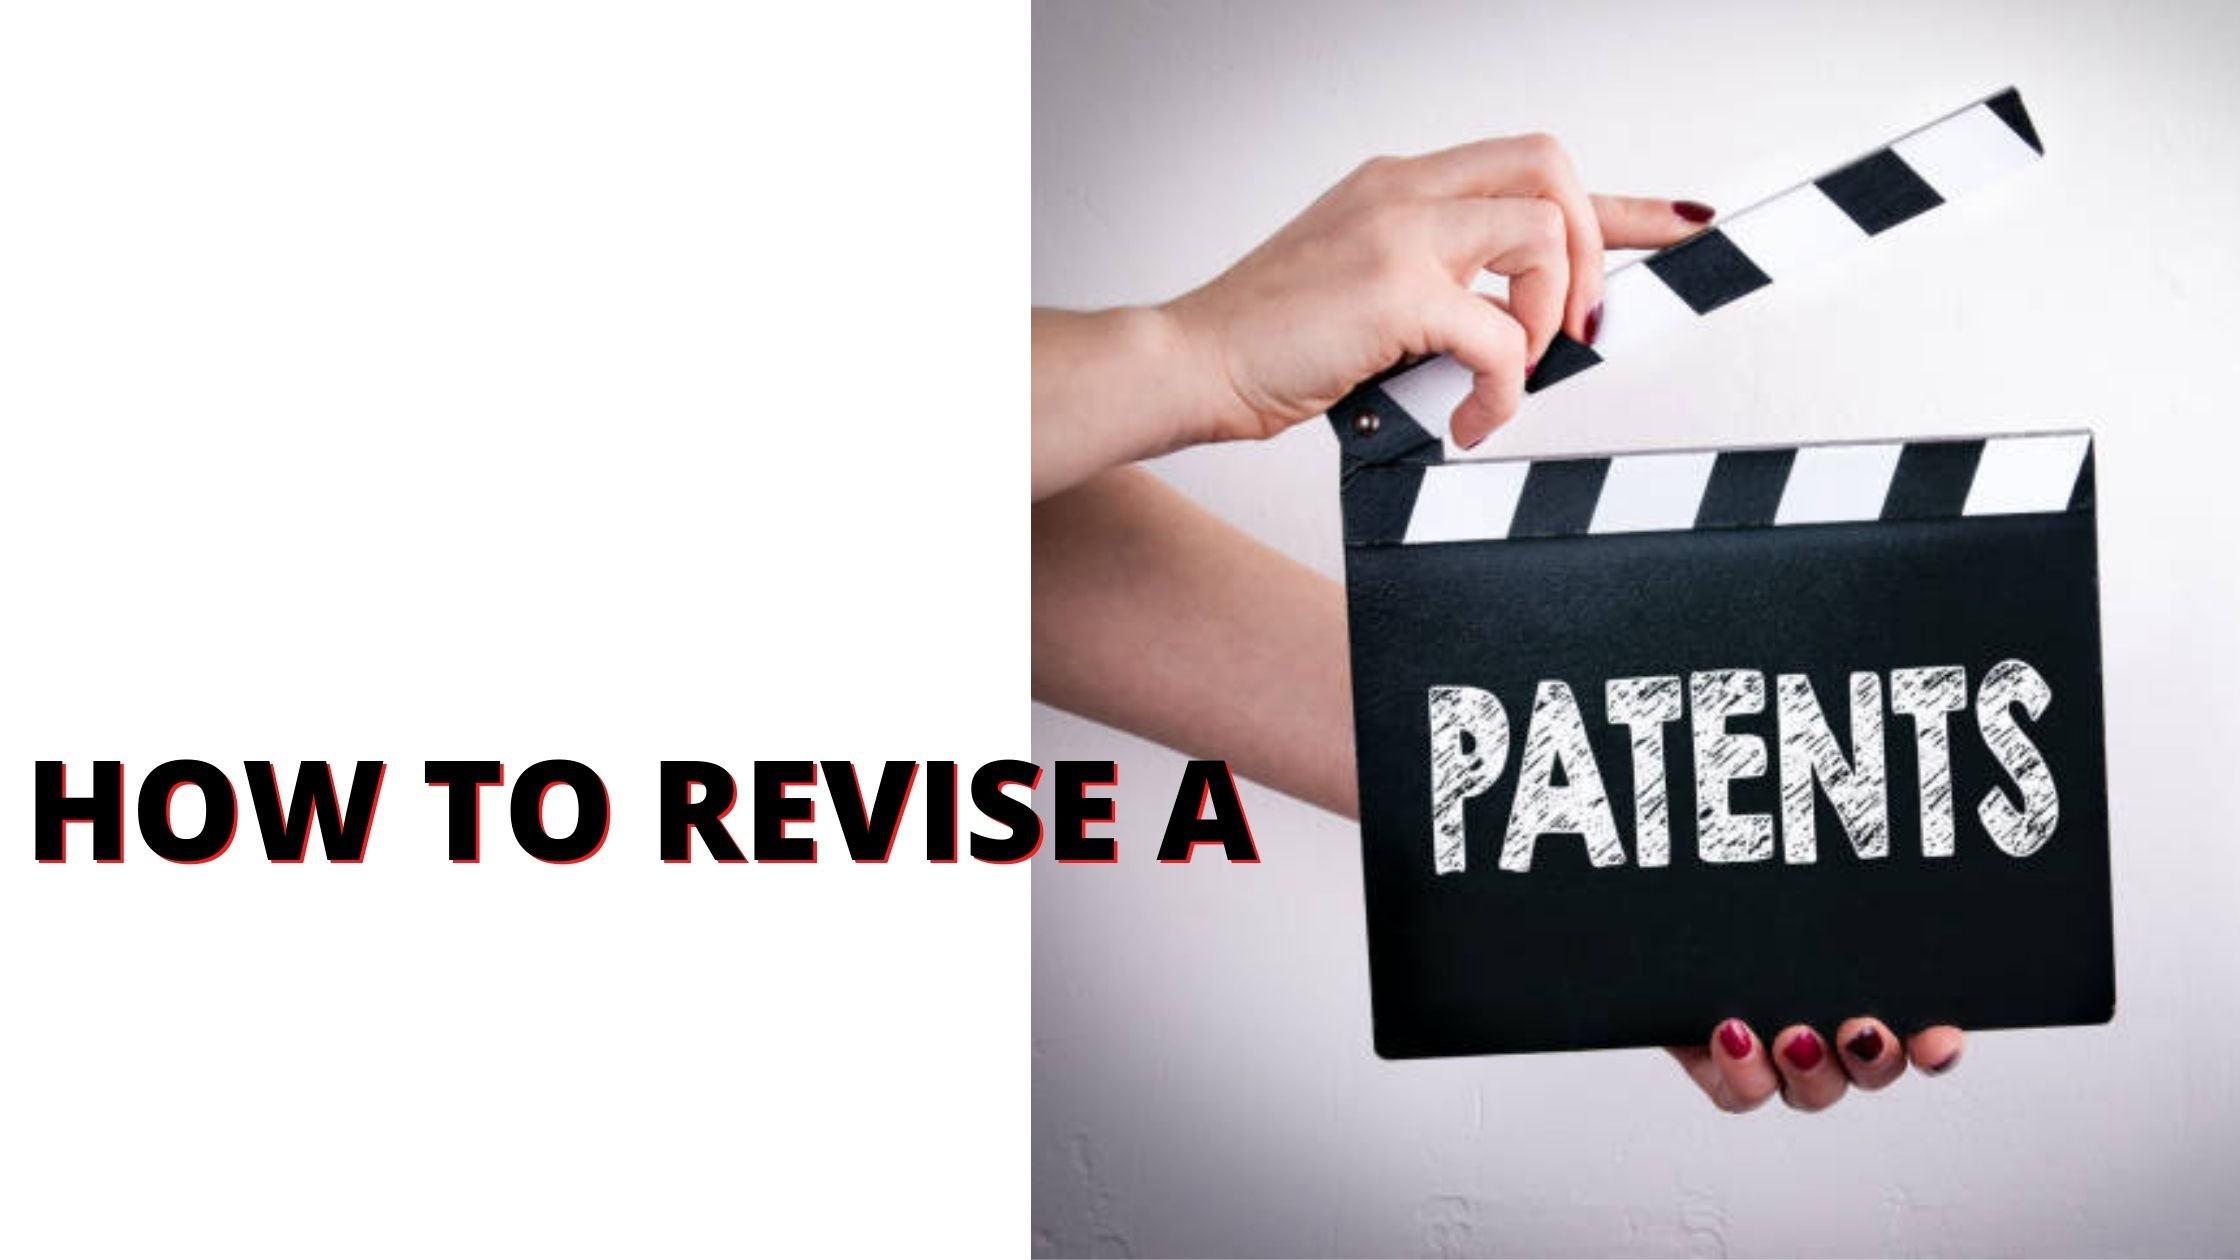 How to Revise a Patent?